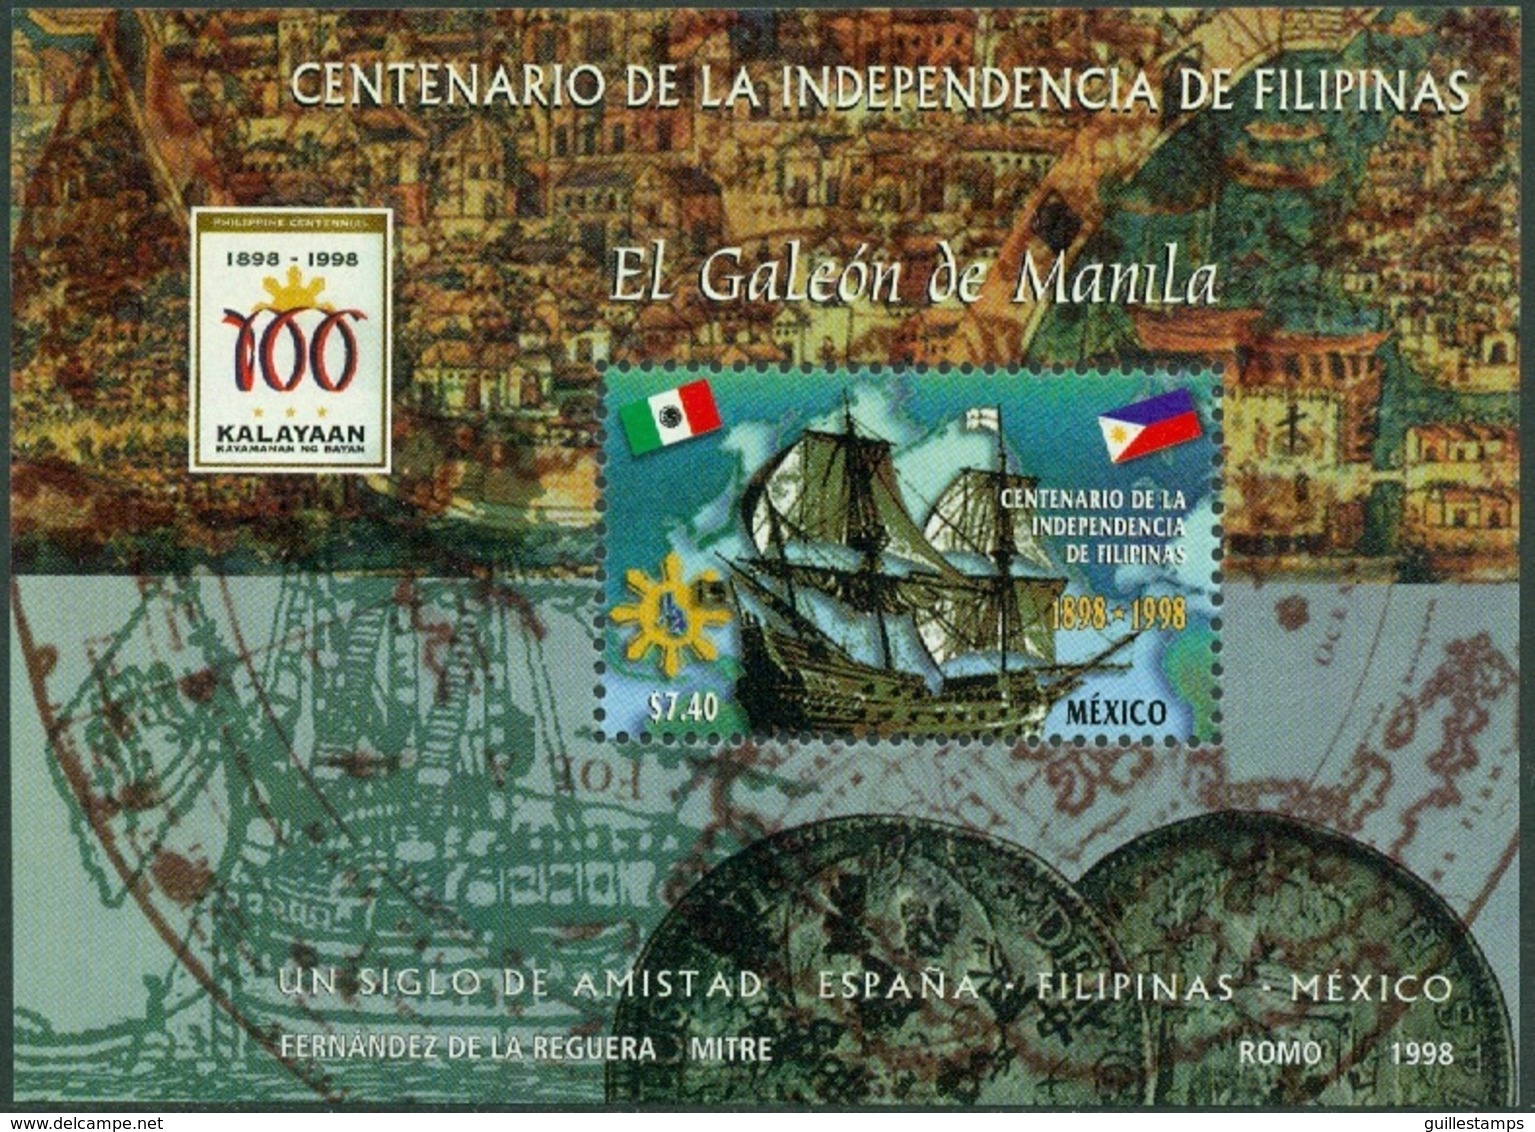 MEXICO 1998 PHILIPPINES INDEPENDENCE S/S, SAILING SHIP** (MNH) - Mexico